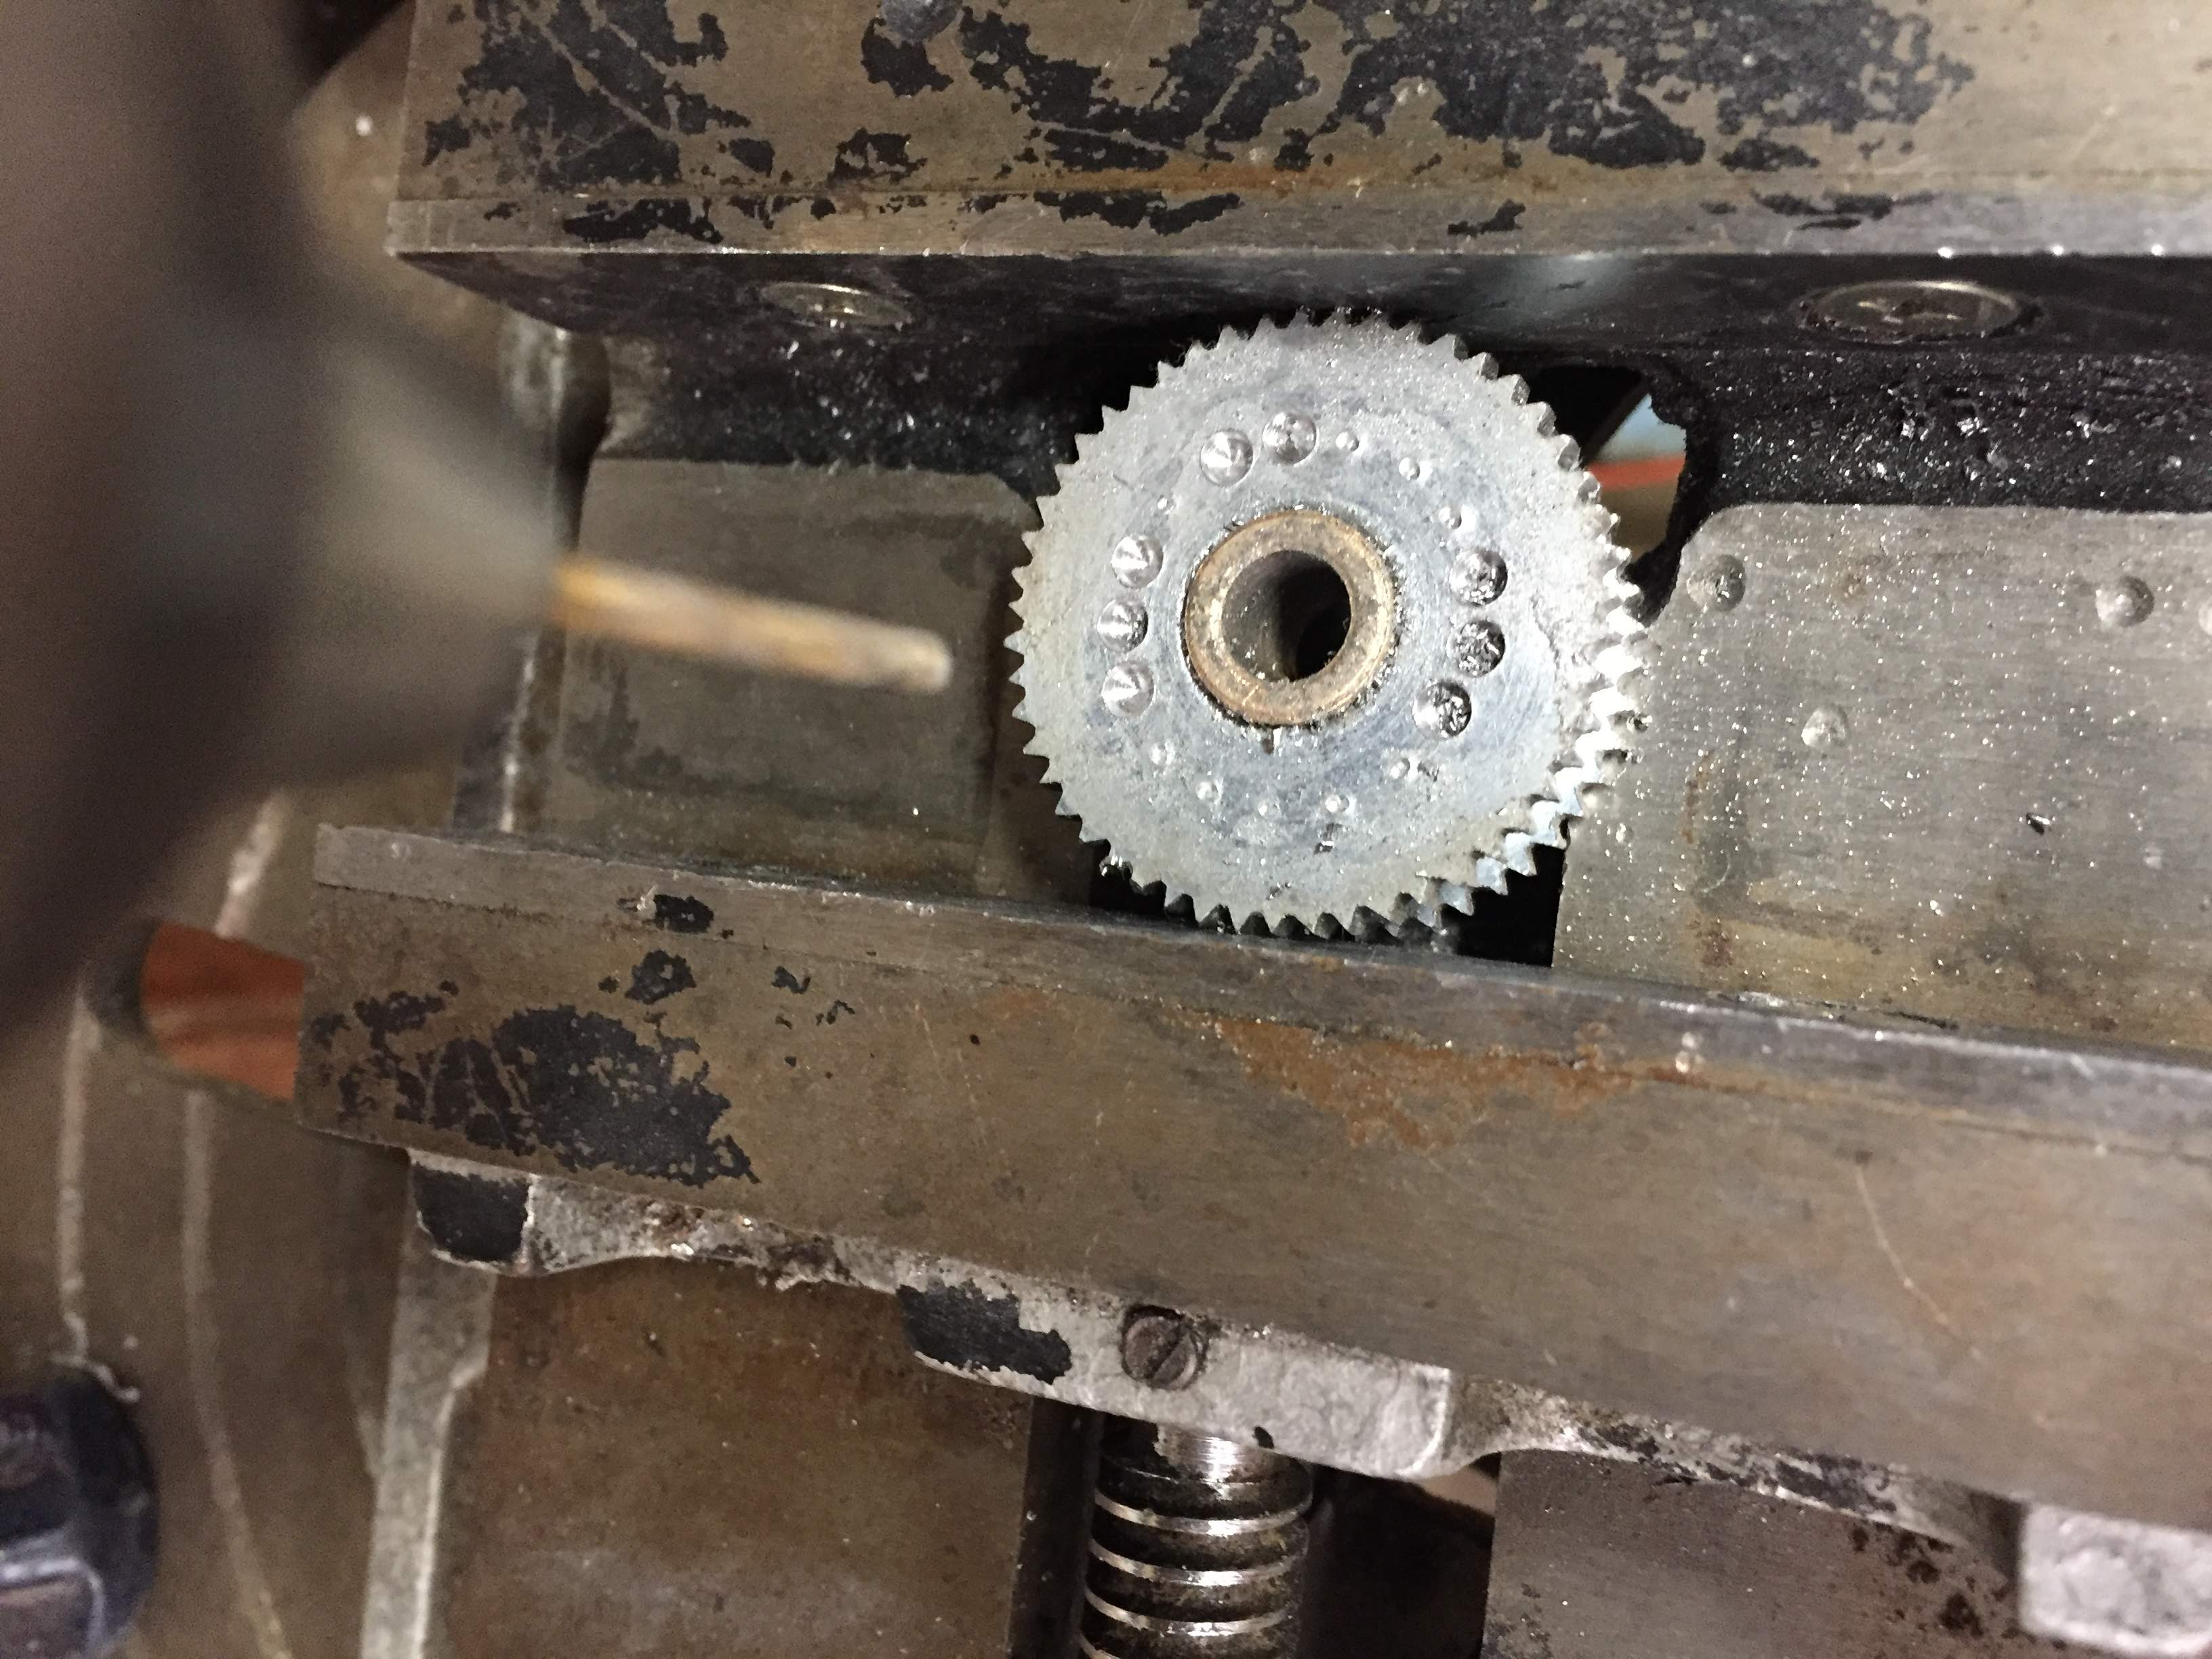 holes drilled into gear face